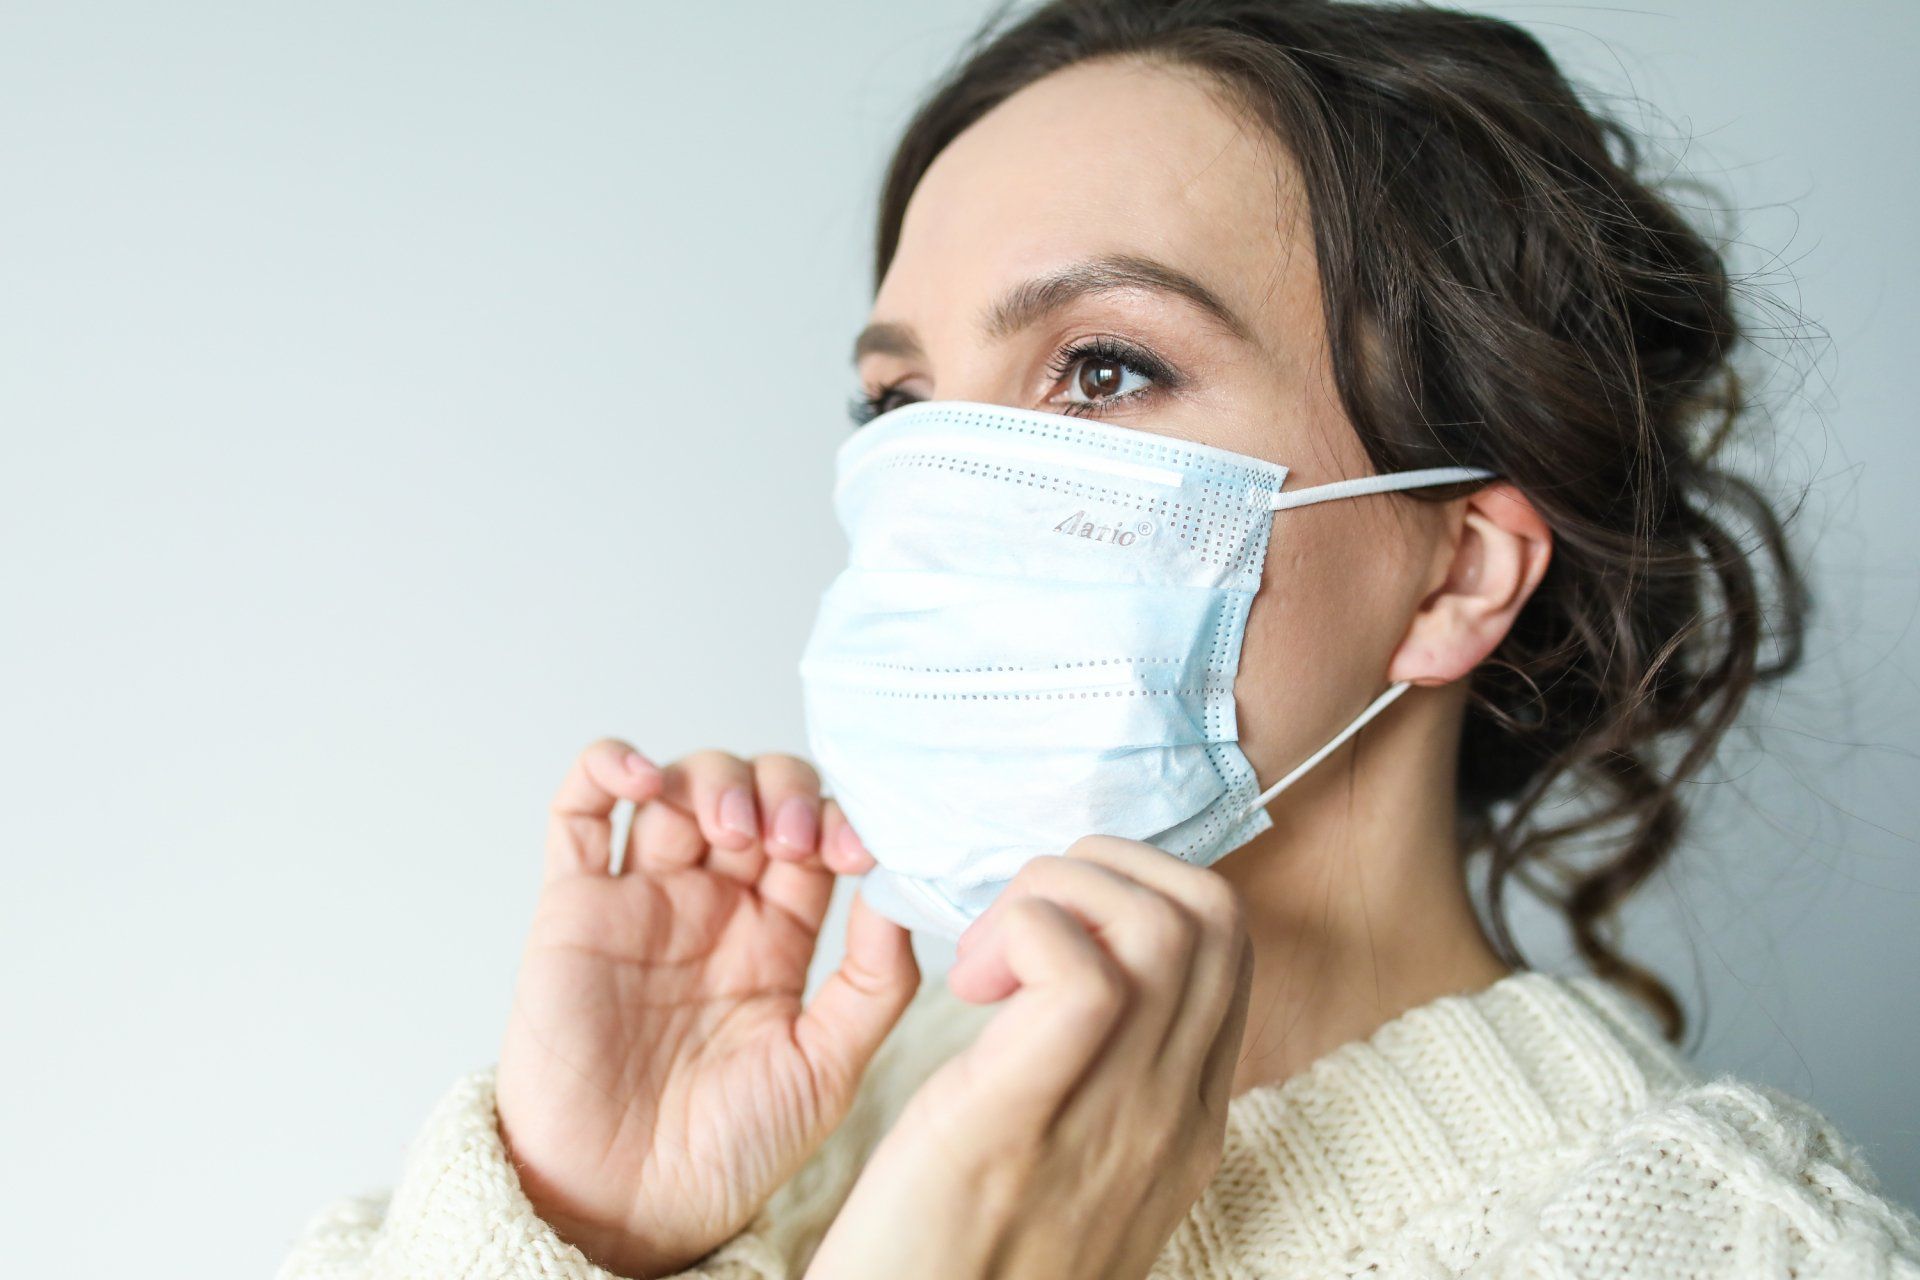 A woman is wearing a medical mask on her face.